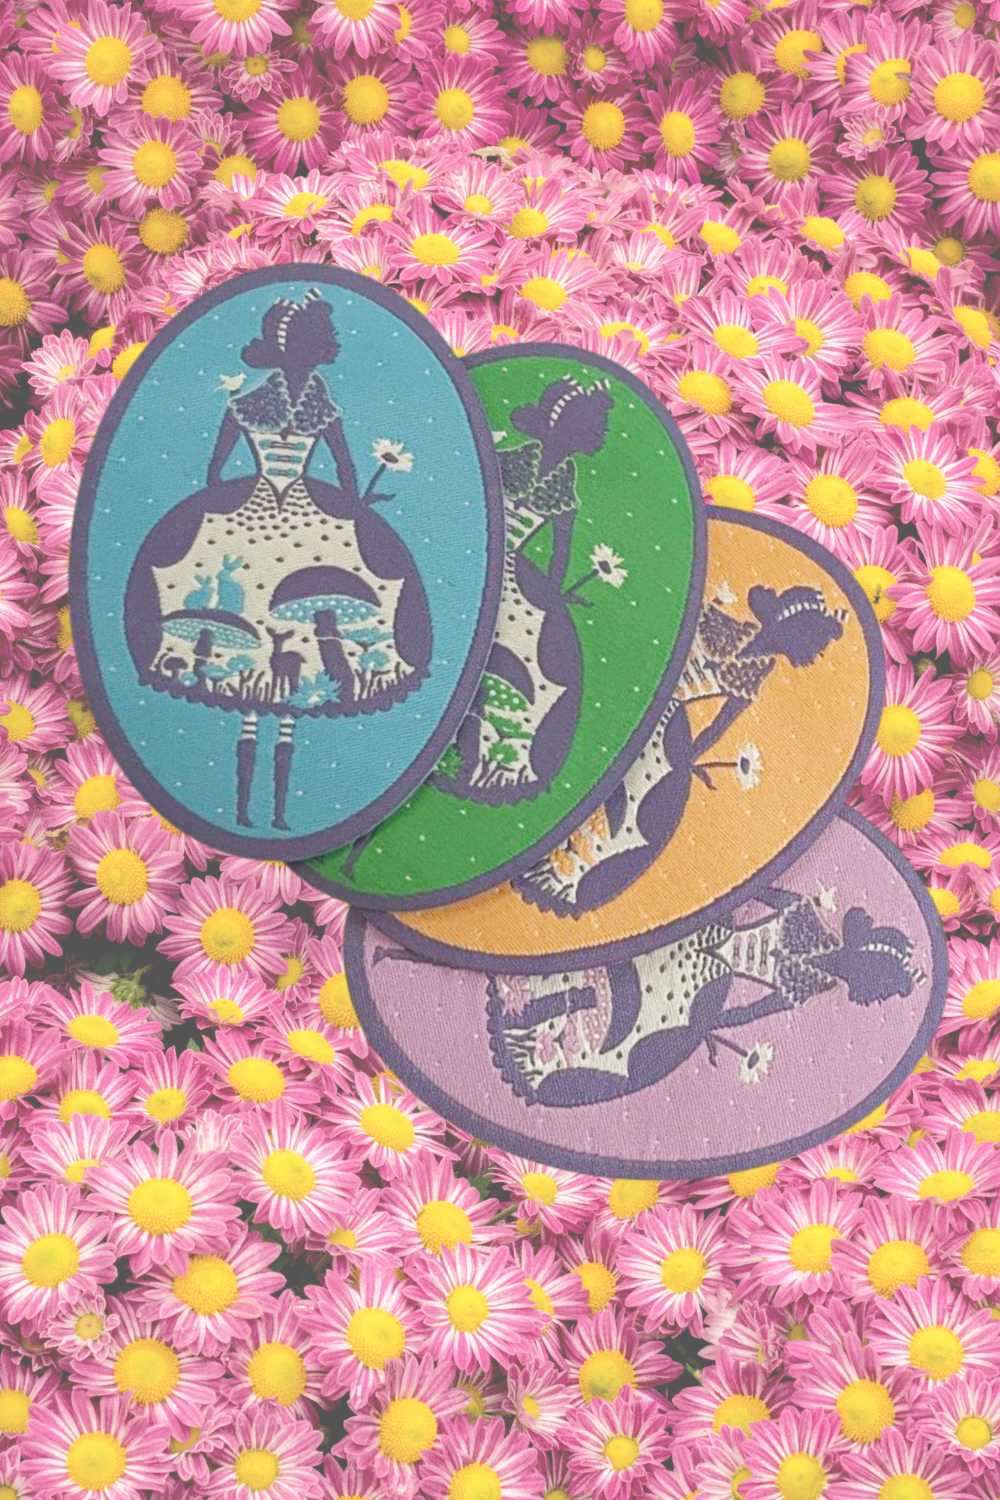 4 oval shaped pastel Alice patches in various colors